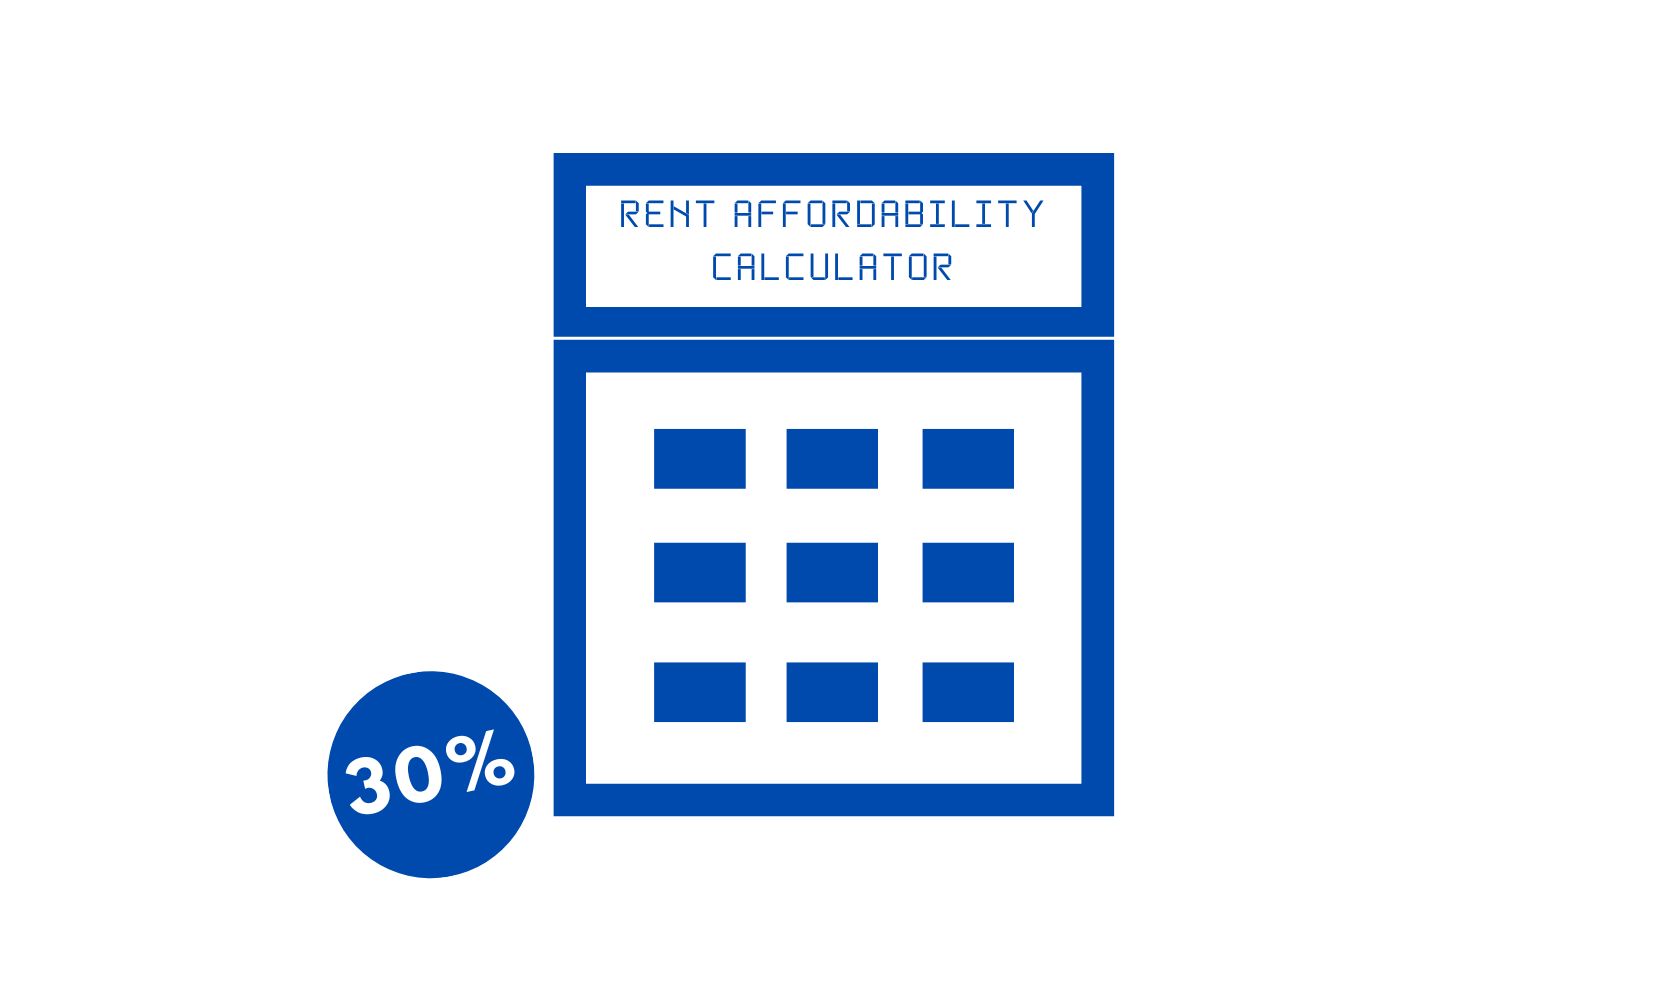 Graphic of a calculator with rent affordability calculator on it